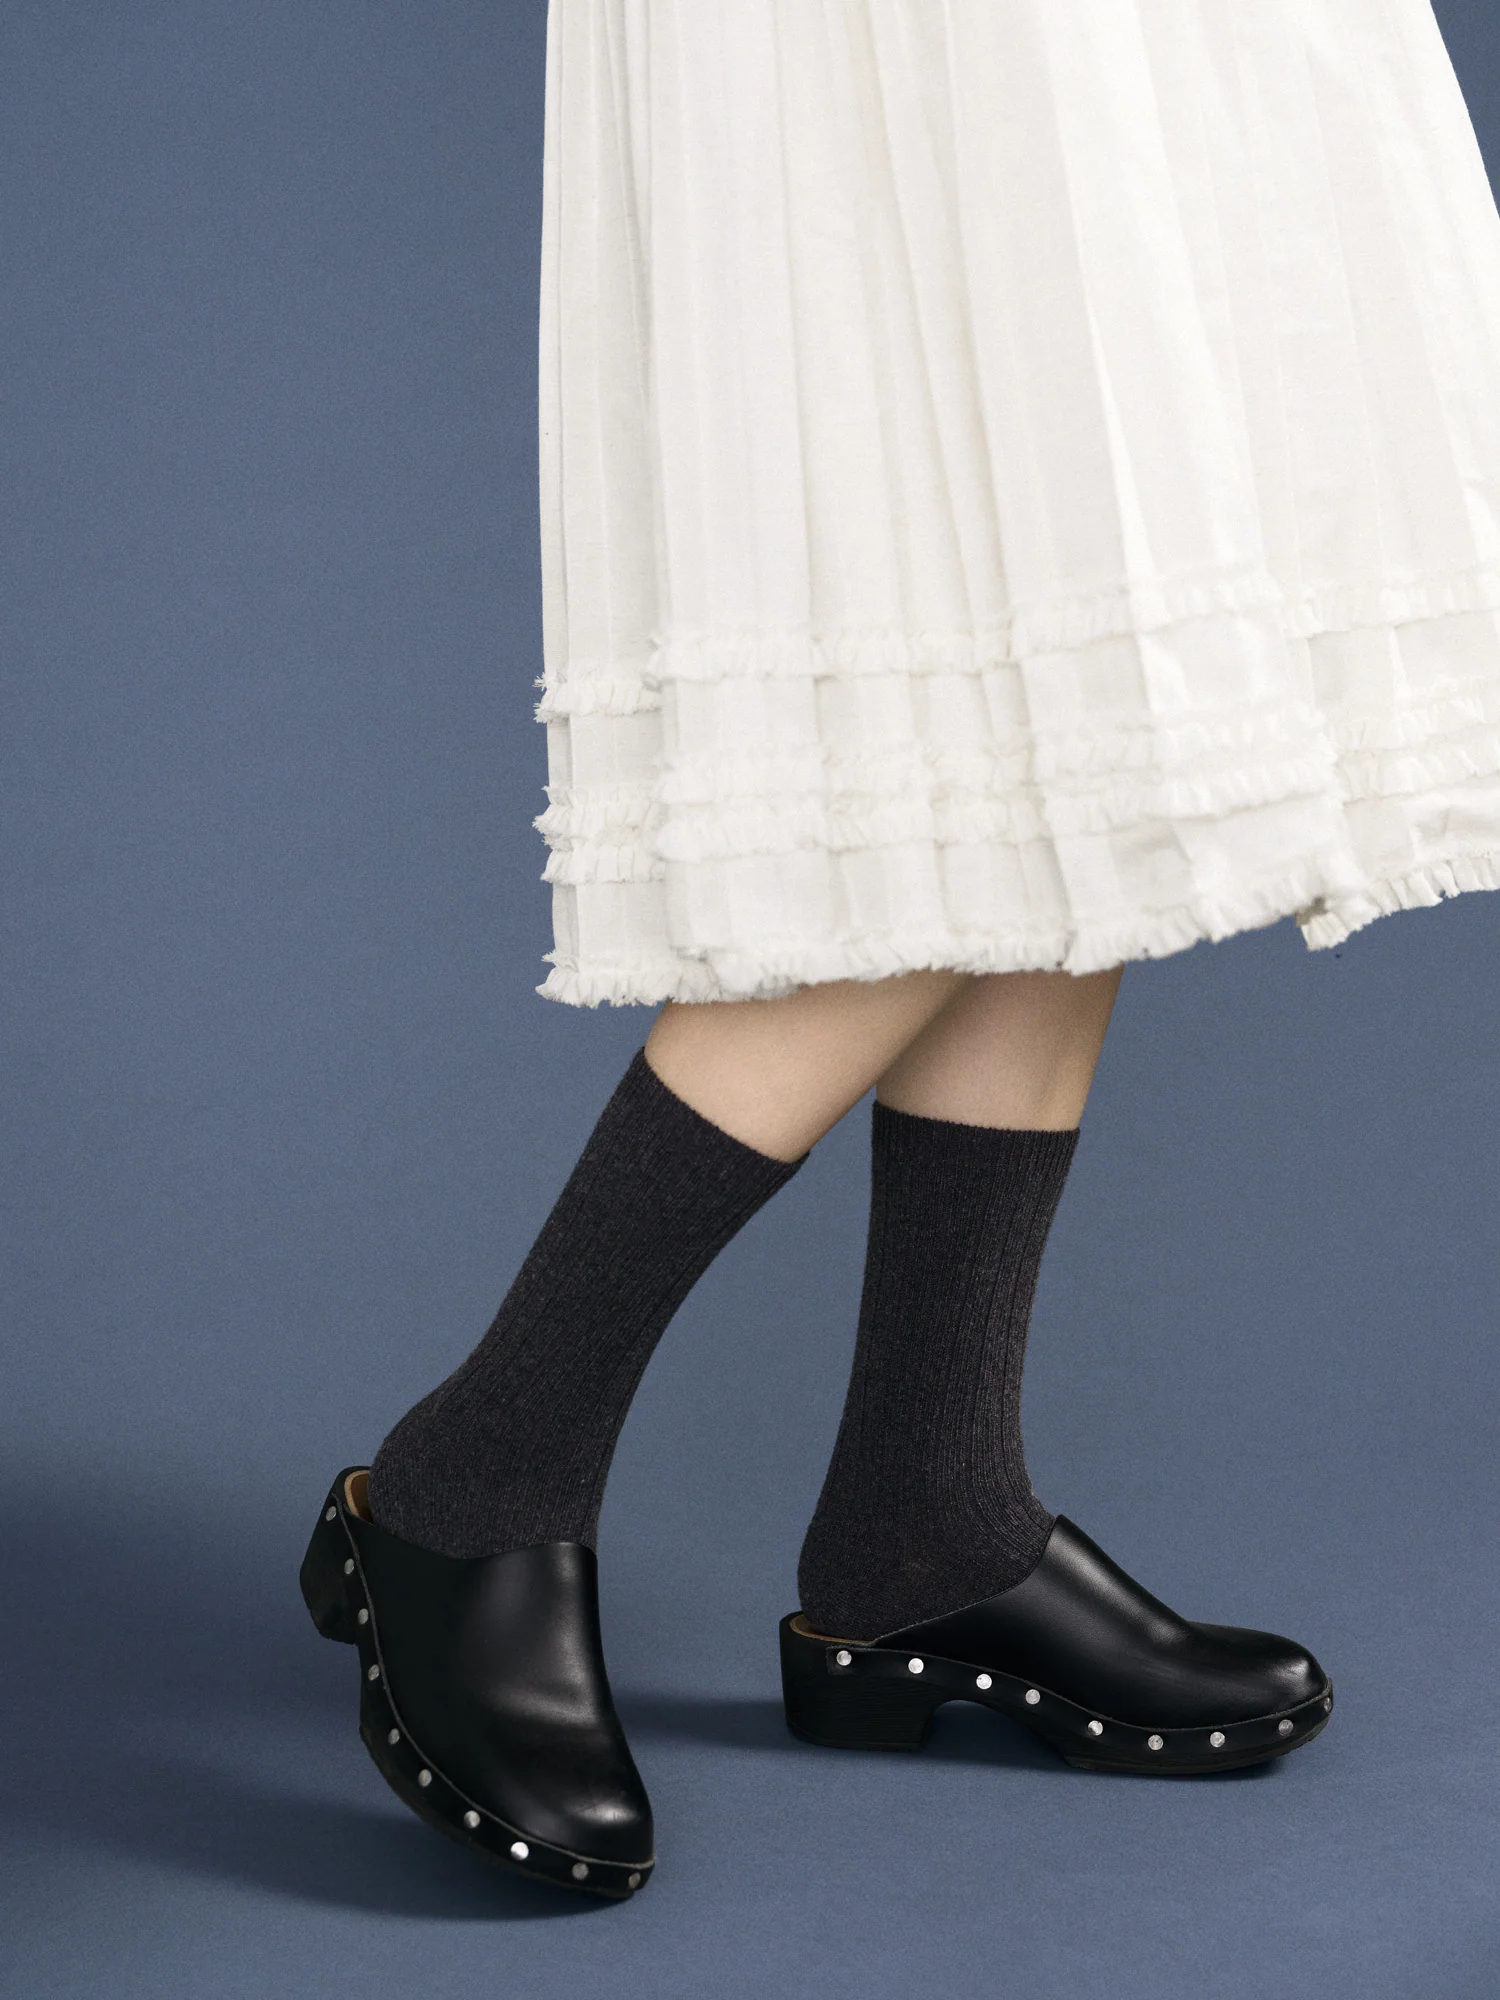 gray cashmere socks paired with a frilly white skirt and black clogs. 